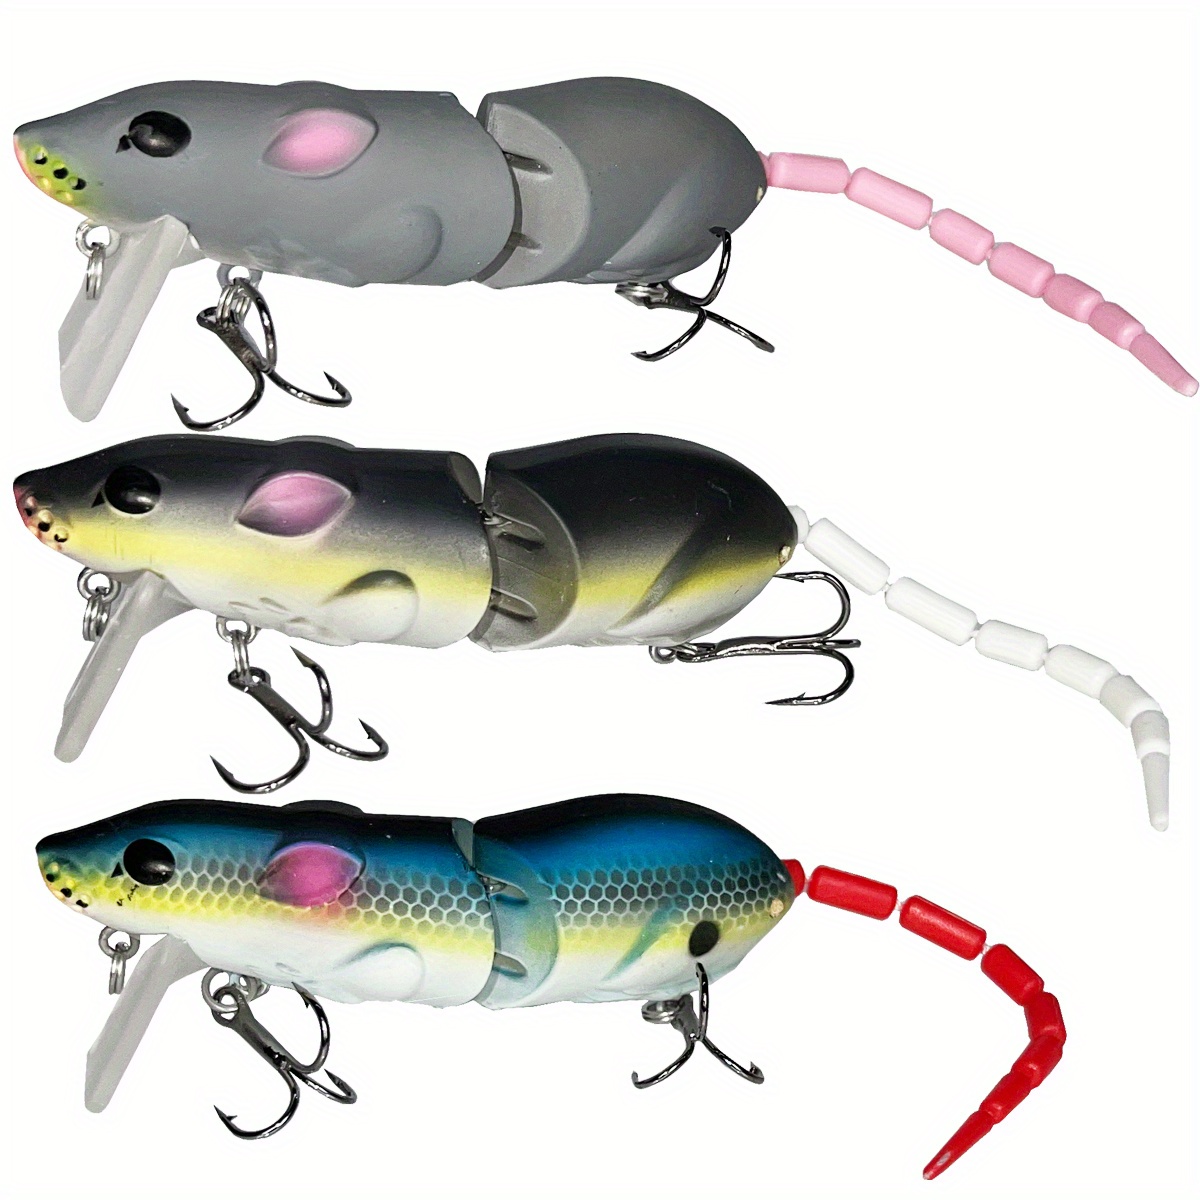 2 Sections 3D Mouse Fishing Lures Hard Plastic Wobbling Rat Artificial  Minnow Bait For Pike Bass Crankbait Fishing Tackle 9008 FishingFishing Lures  Pike Crankbait From 13,59 €